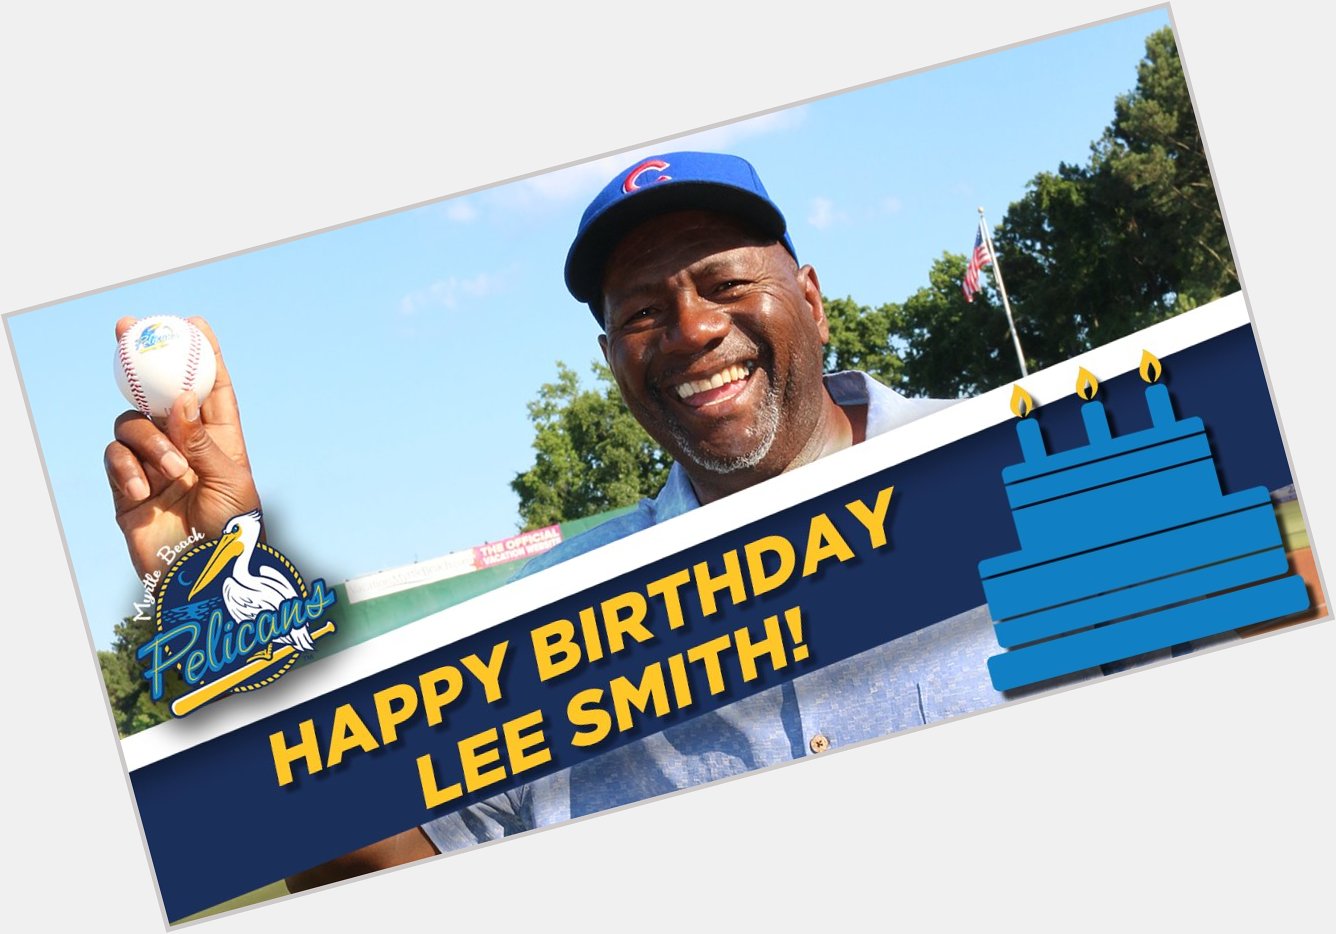 A Hall of Fame smile Happy Birthday, Lee Smith! 